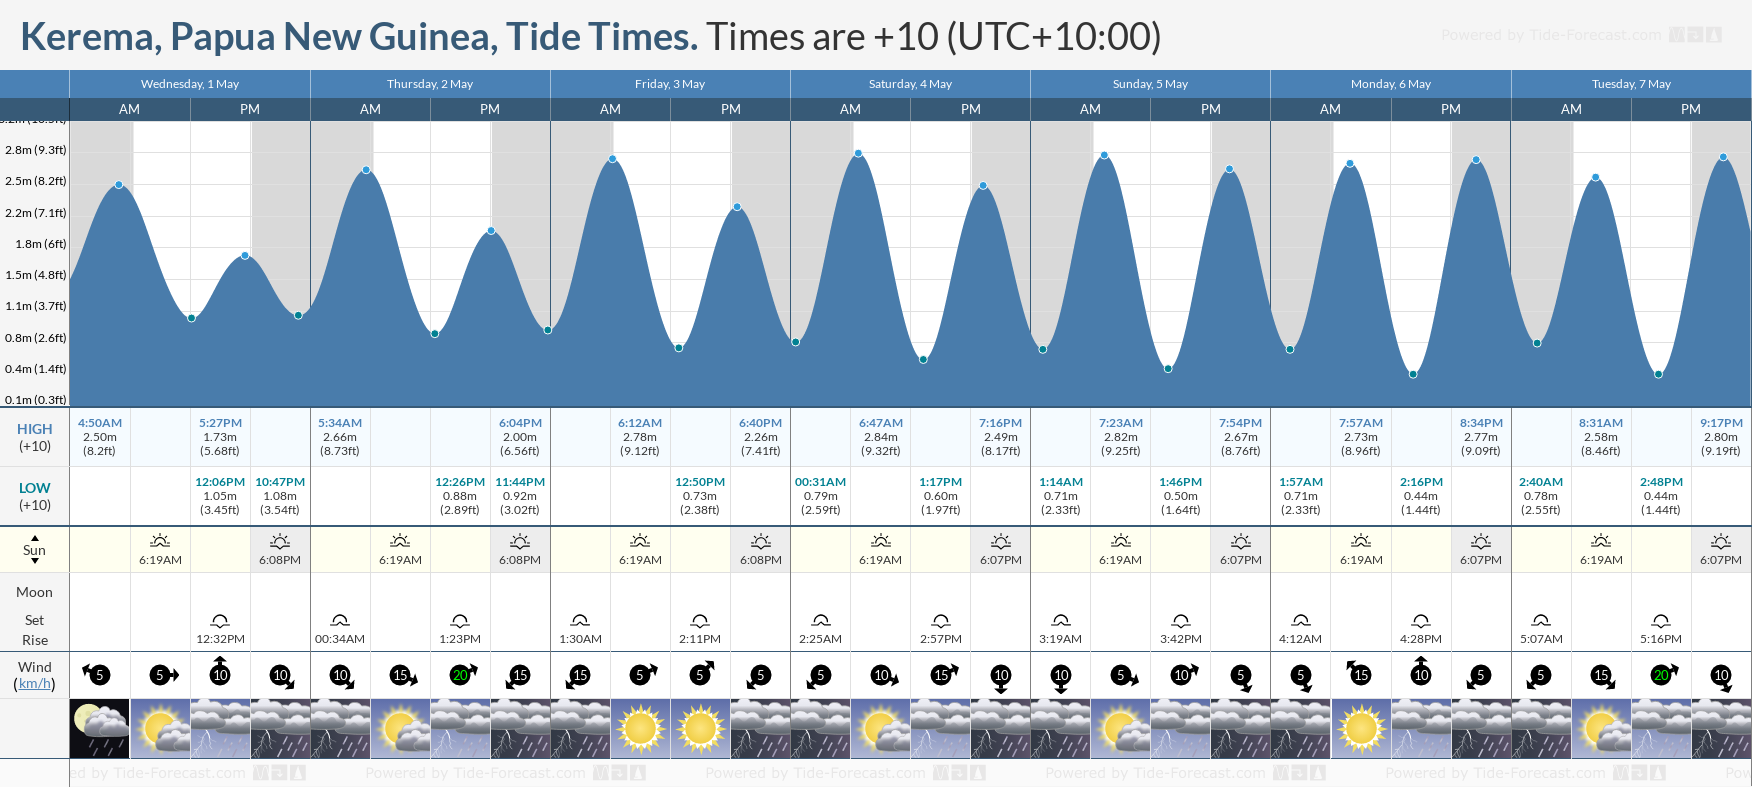 Kerema, Papua New Guinea Tide Chart including high and low tide tide times for the next 7 days